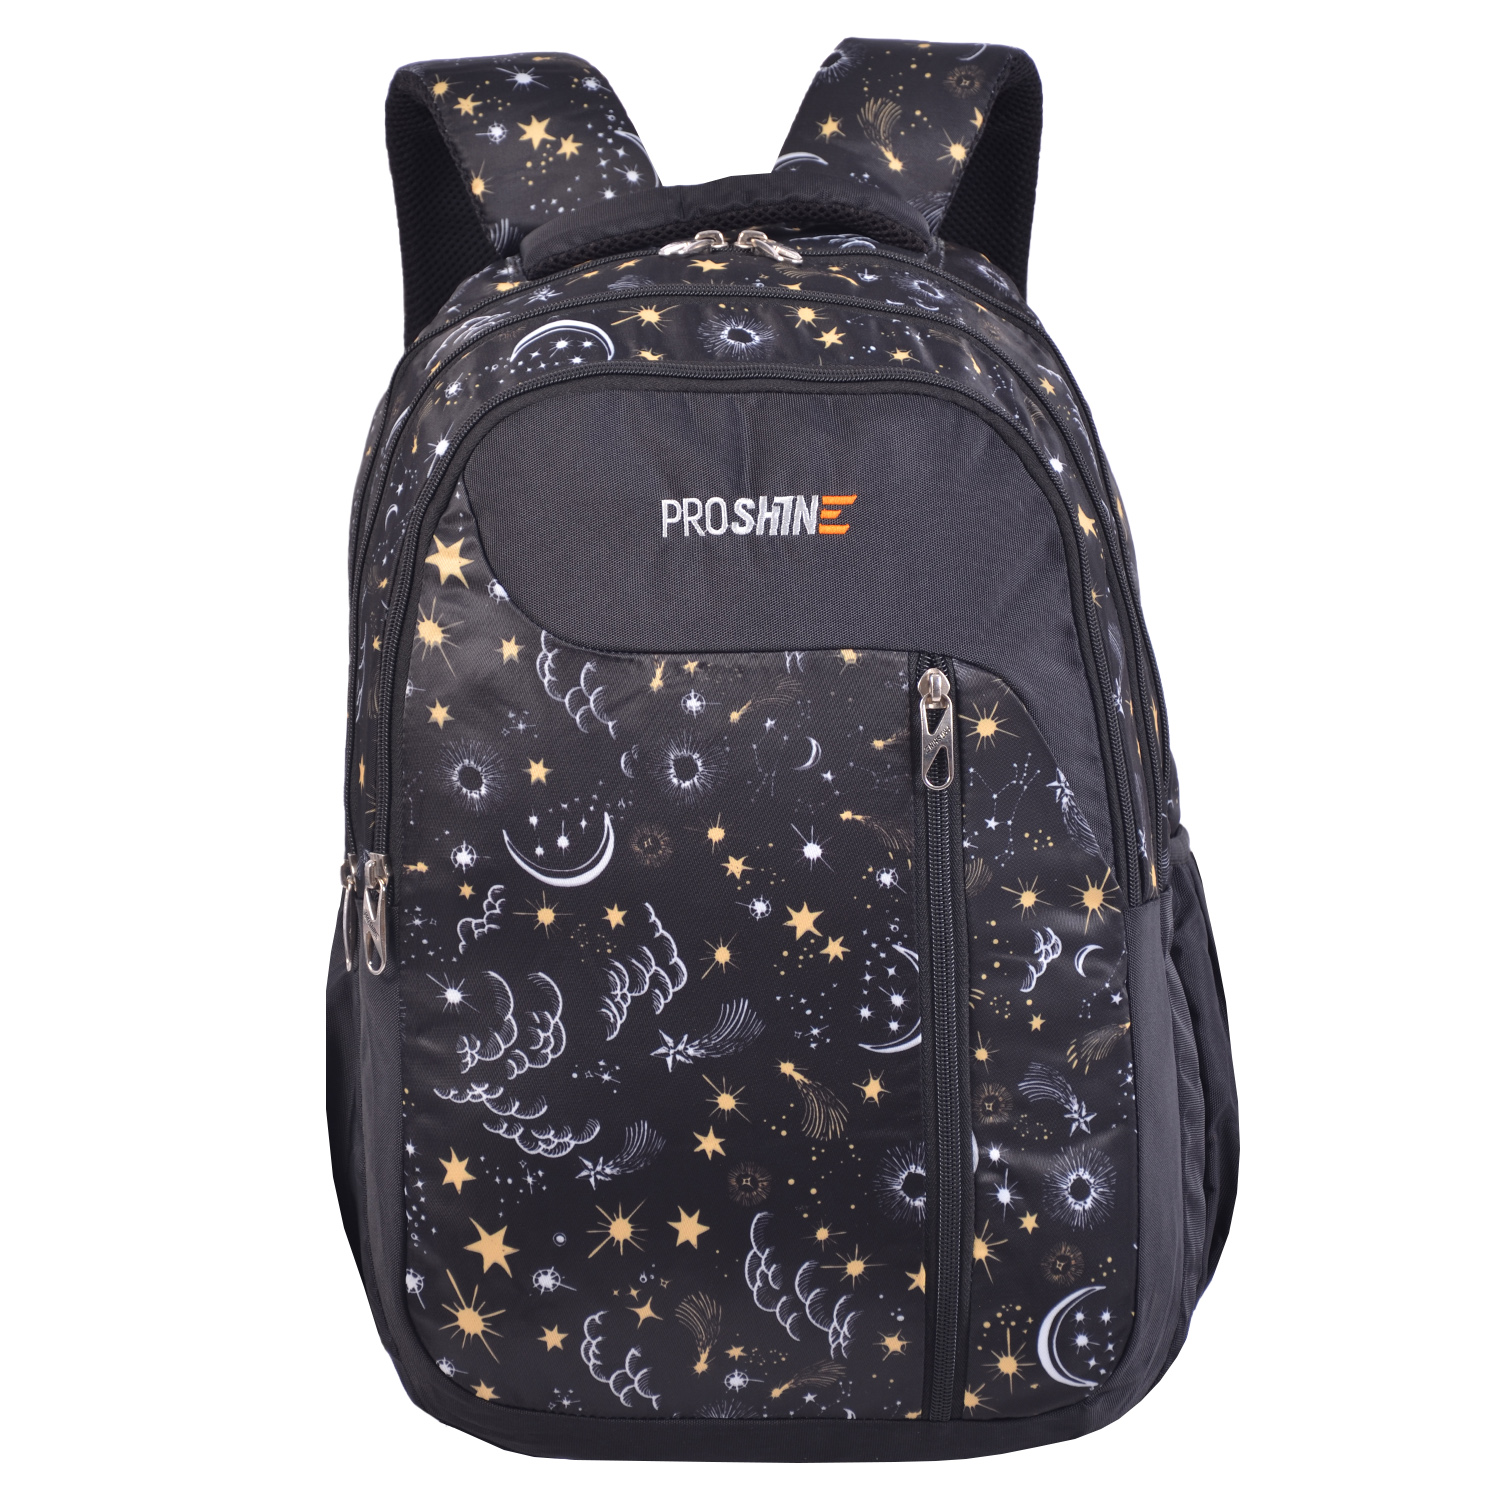 RoshanBags_PROSHINE 38L CASUAL BACKPACK A0399 YELLOW